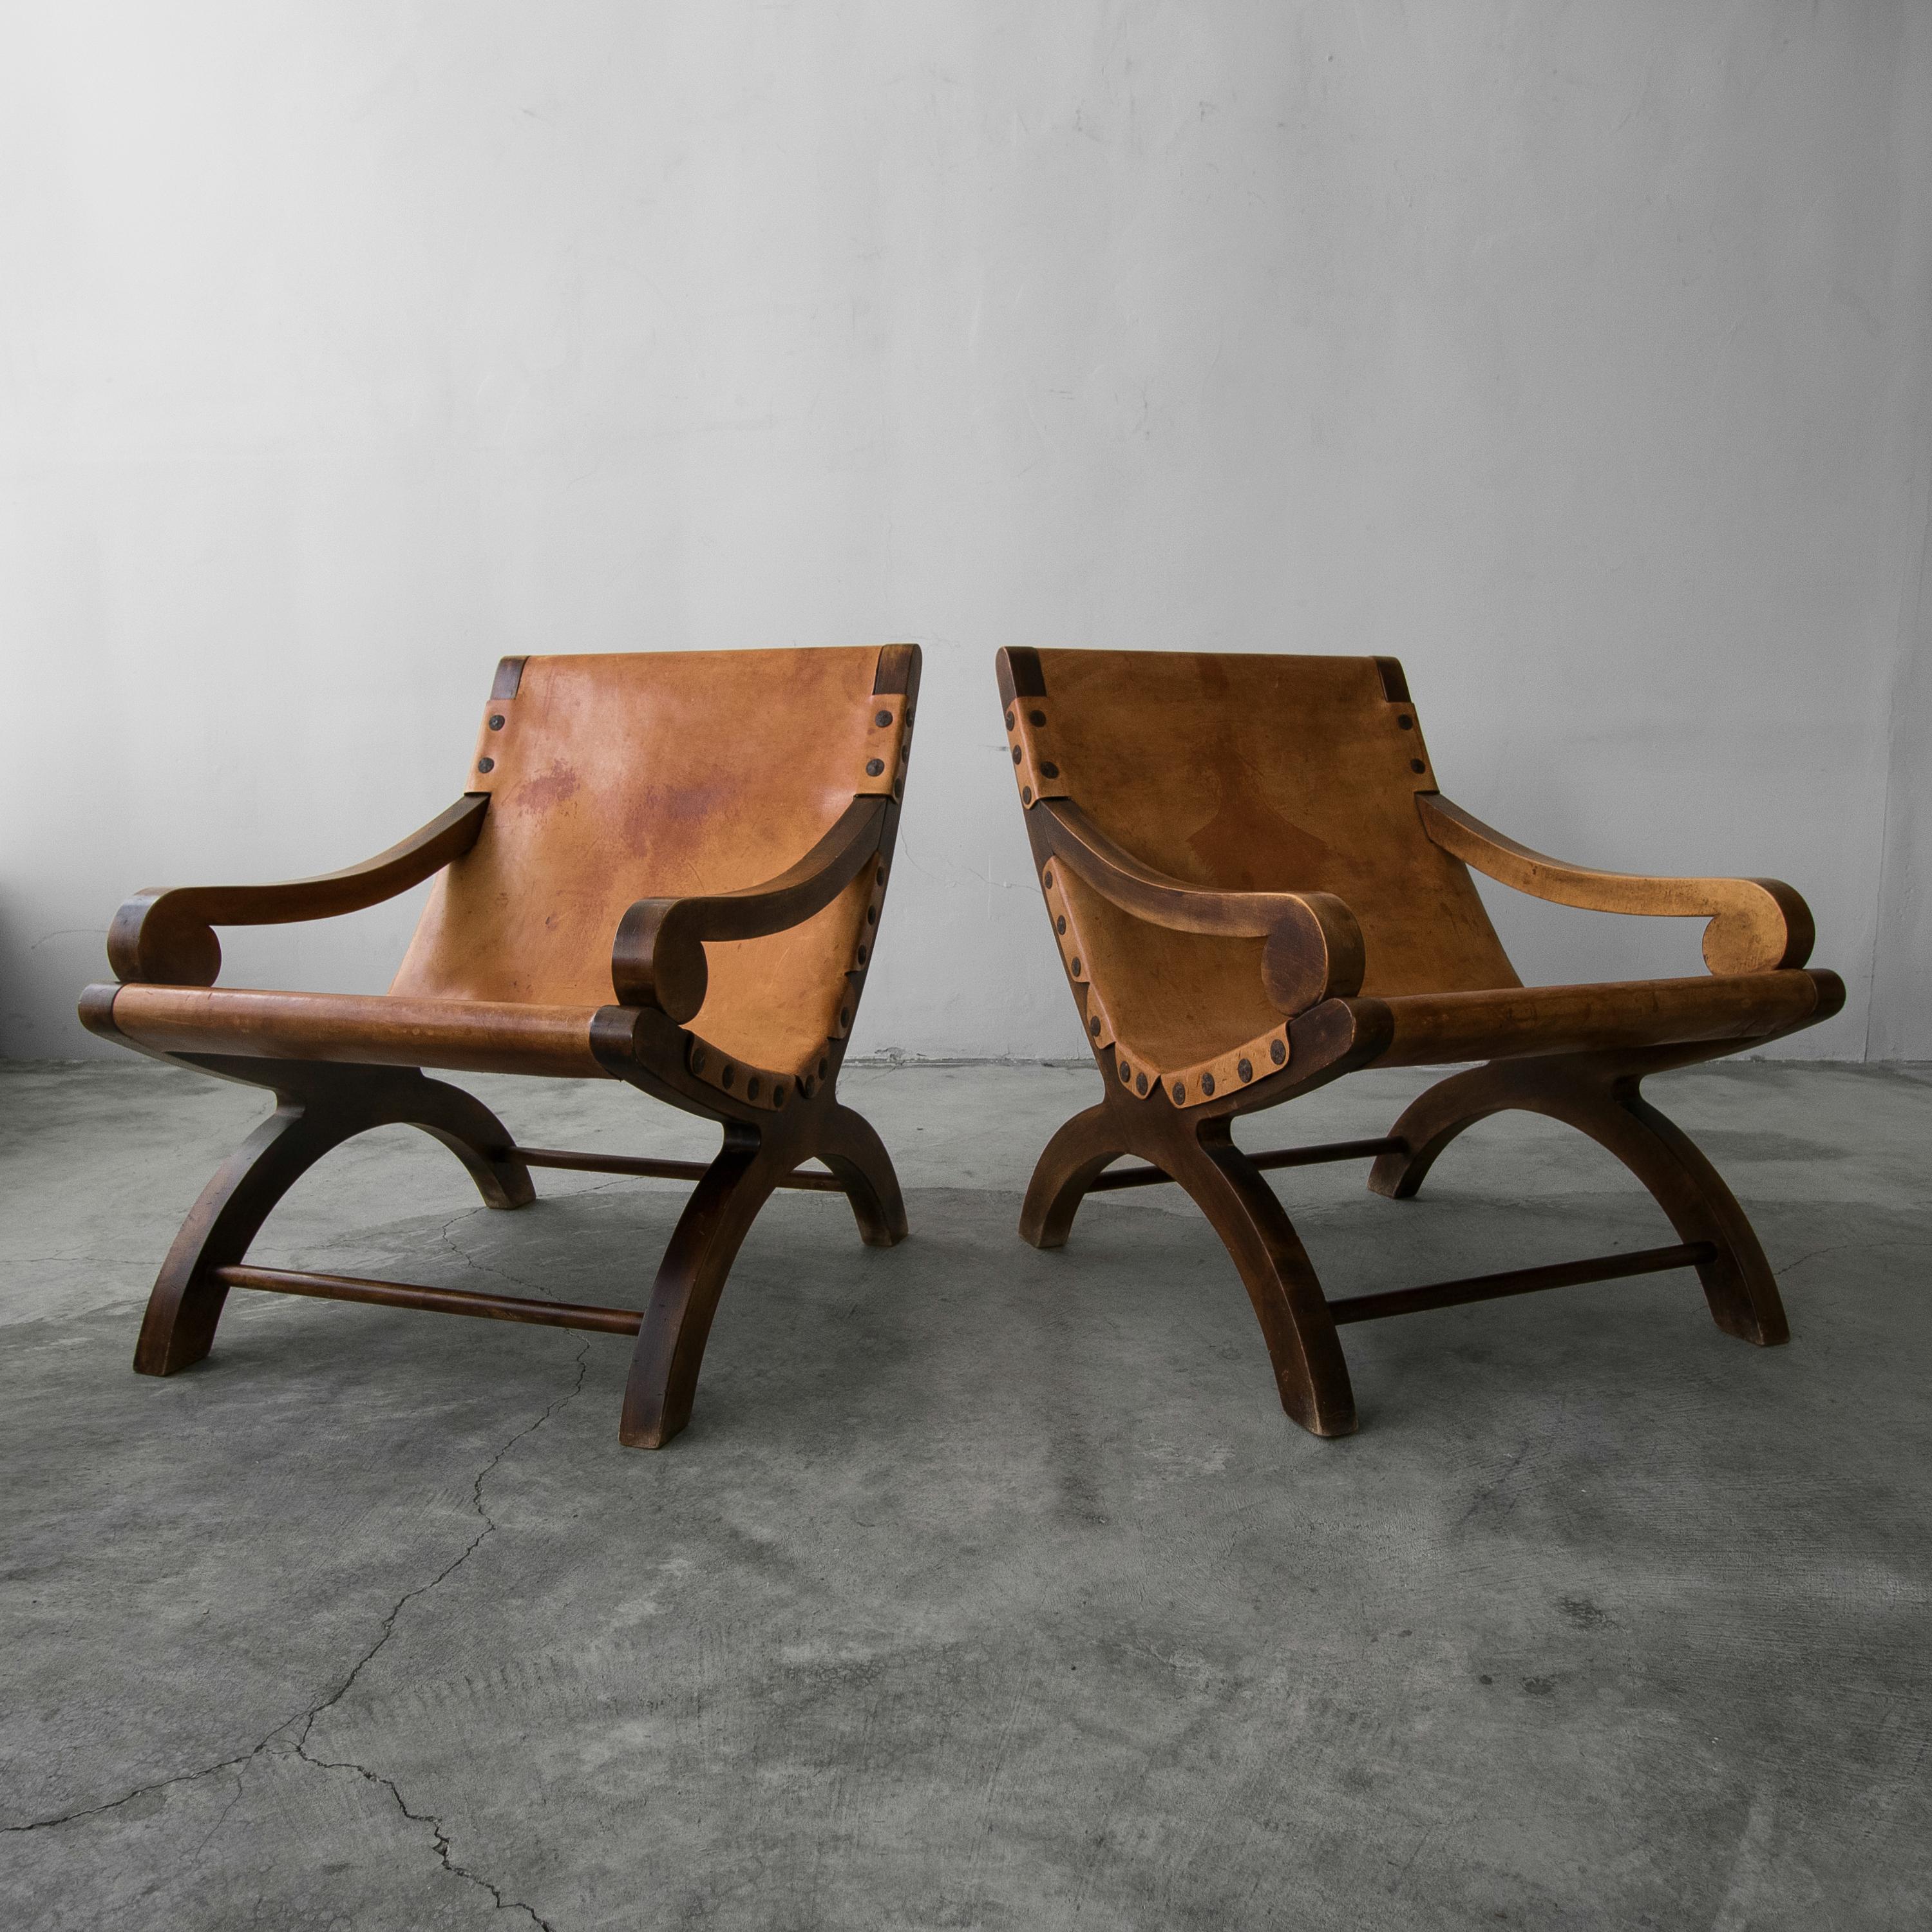 This pair of Butaque leather sling chairs is nothing short of amazing. Oversized and huge on character and style. These beauties are a site to behold. With all the amazing details of midcentury Mexican craftsmanship, combined with beautifully